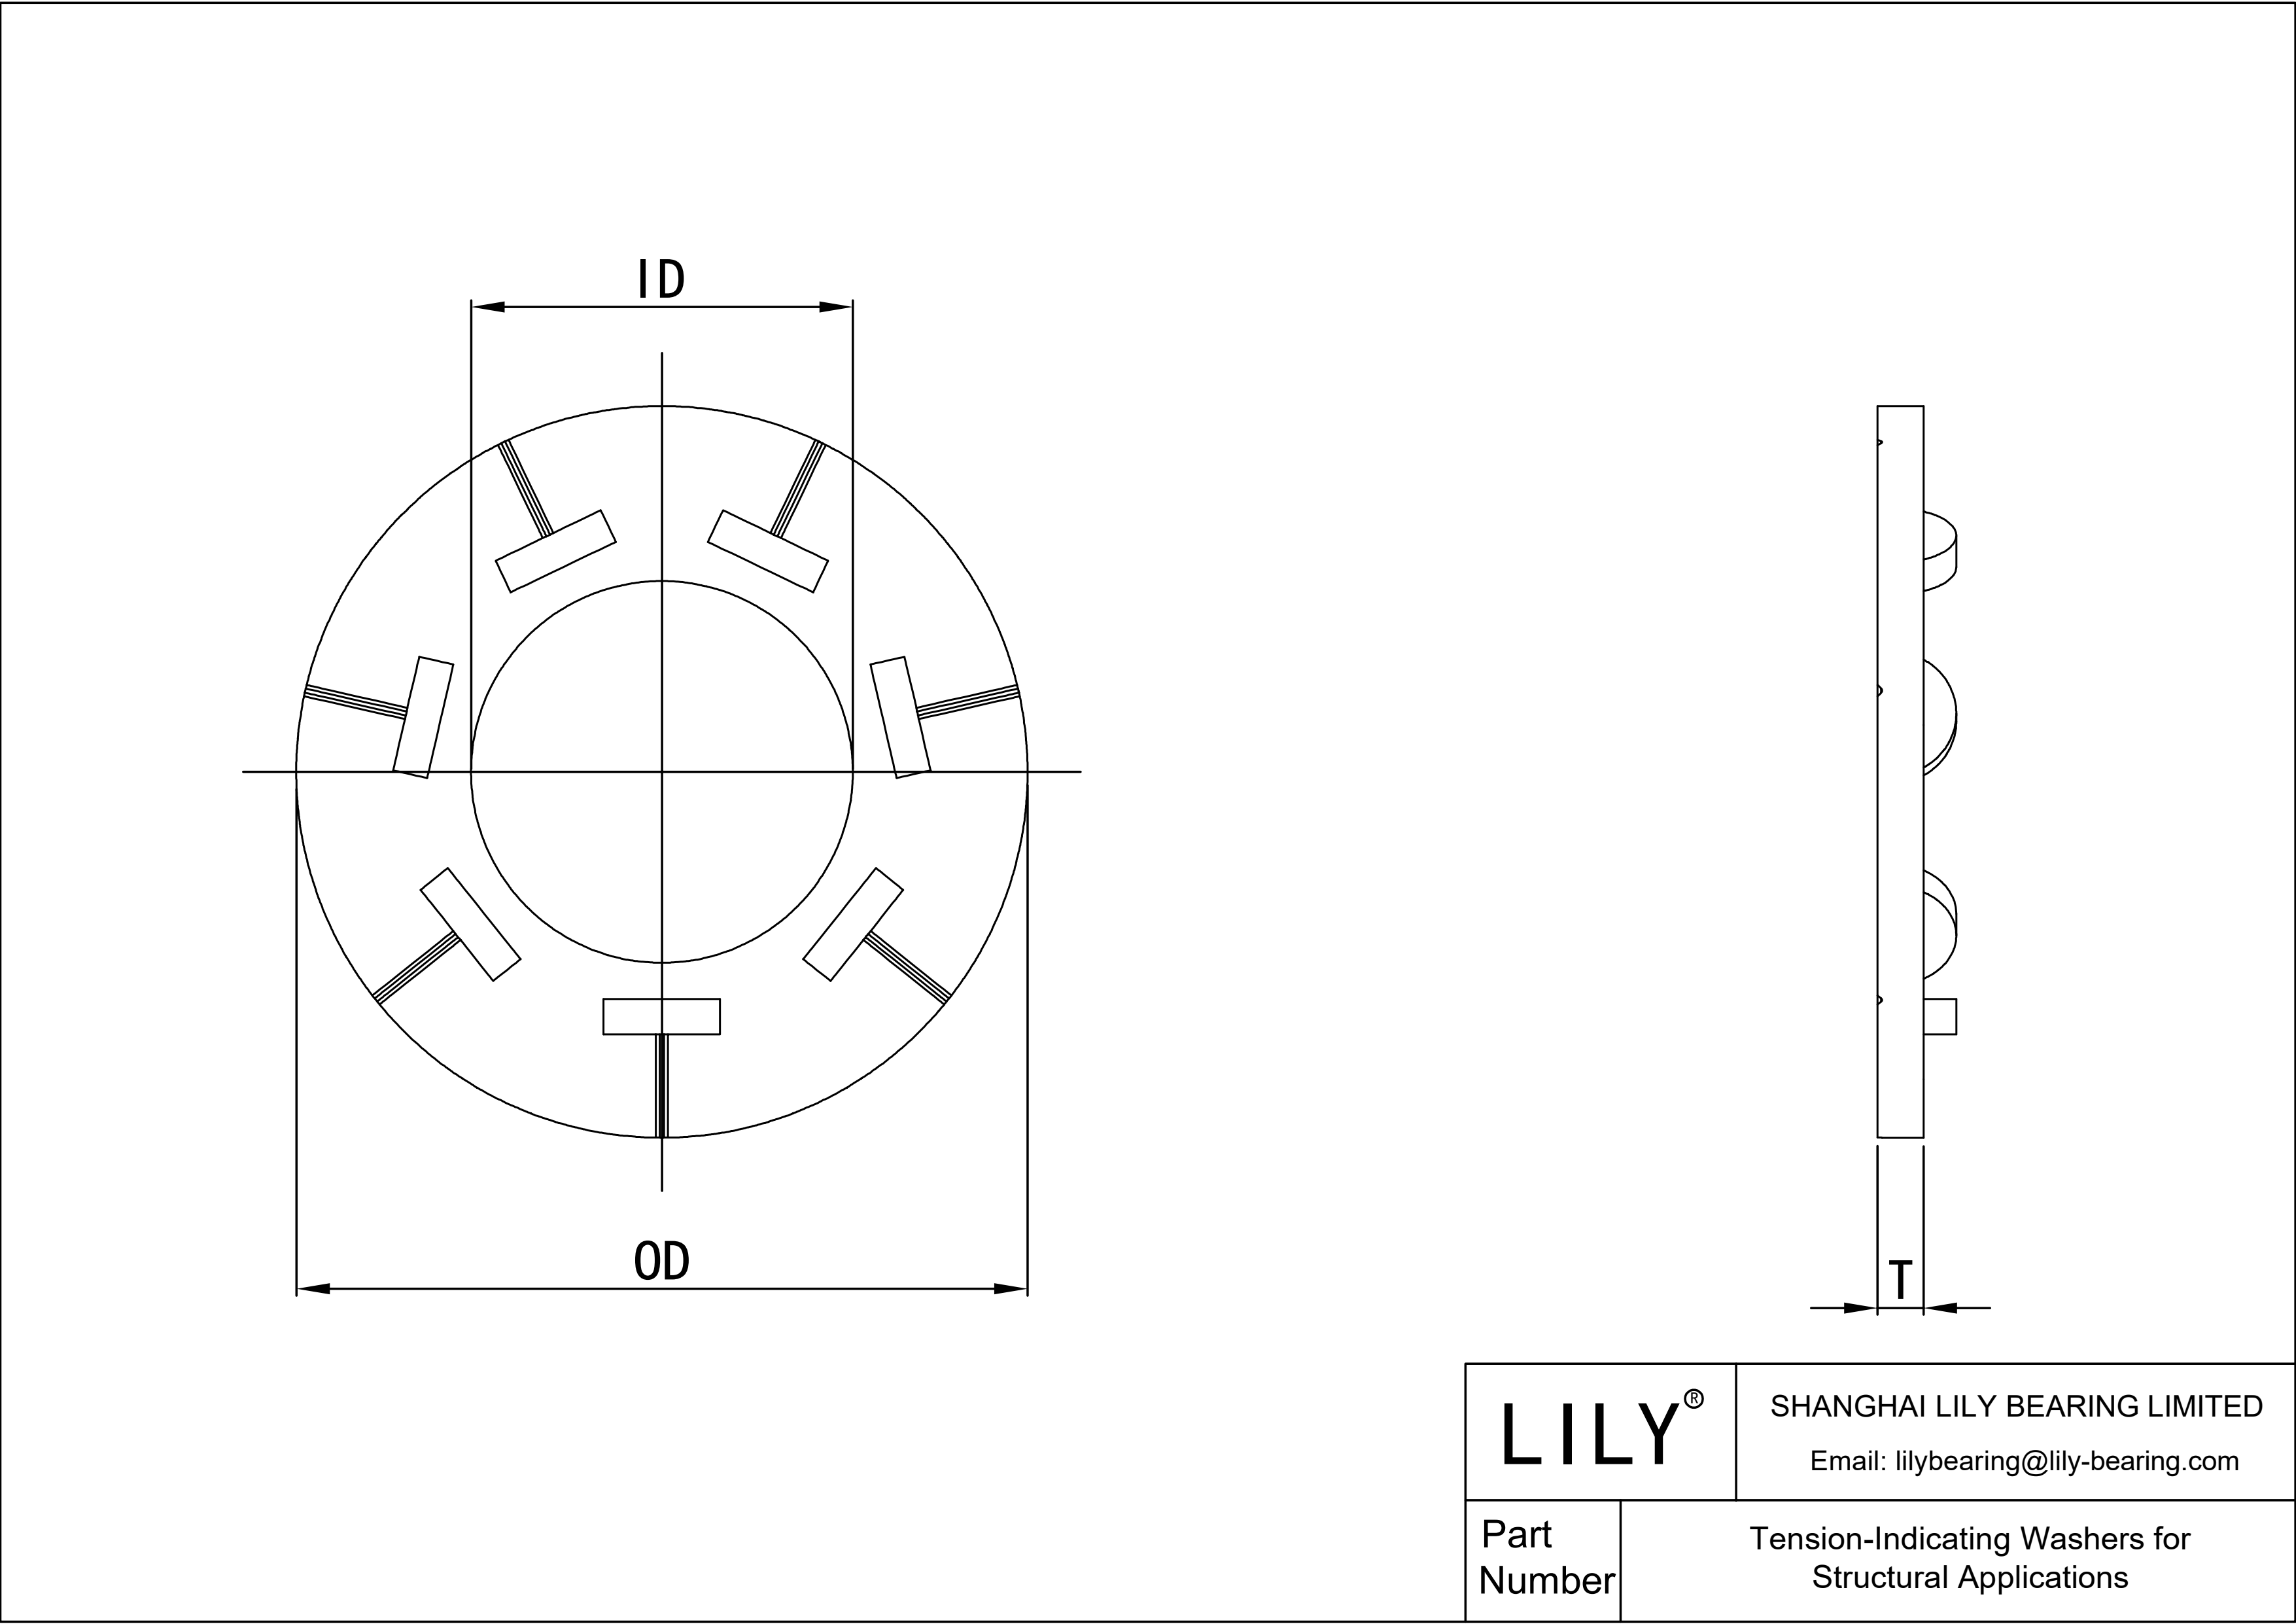 JFDBIABBB Tension-Indicating Washers for Structural Applications cad drawing